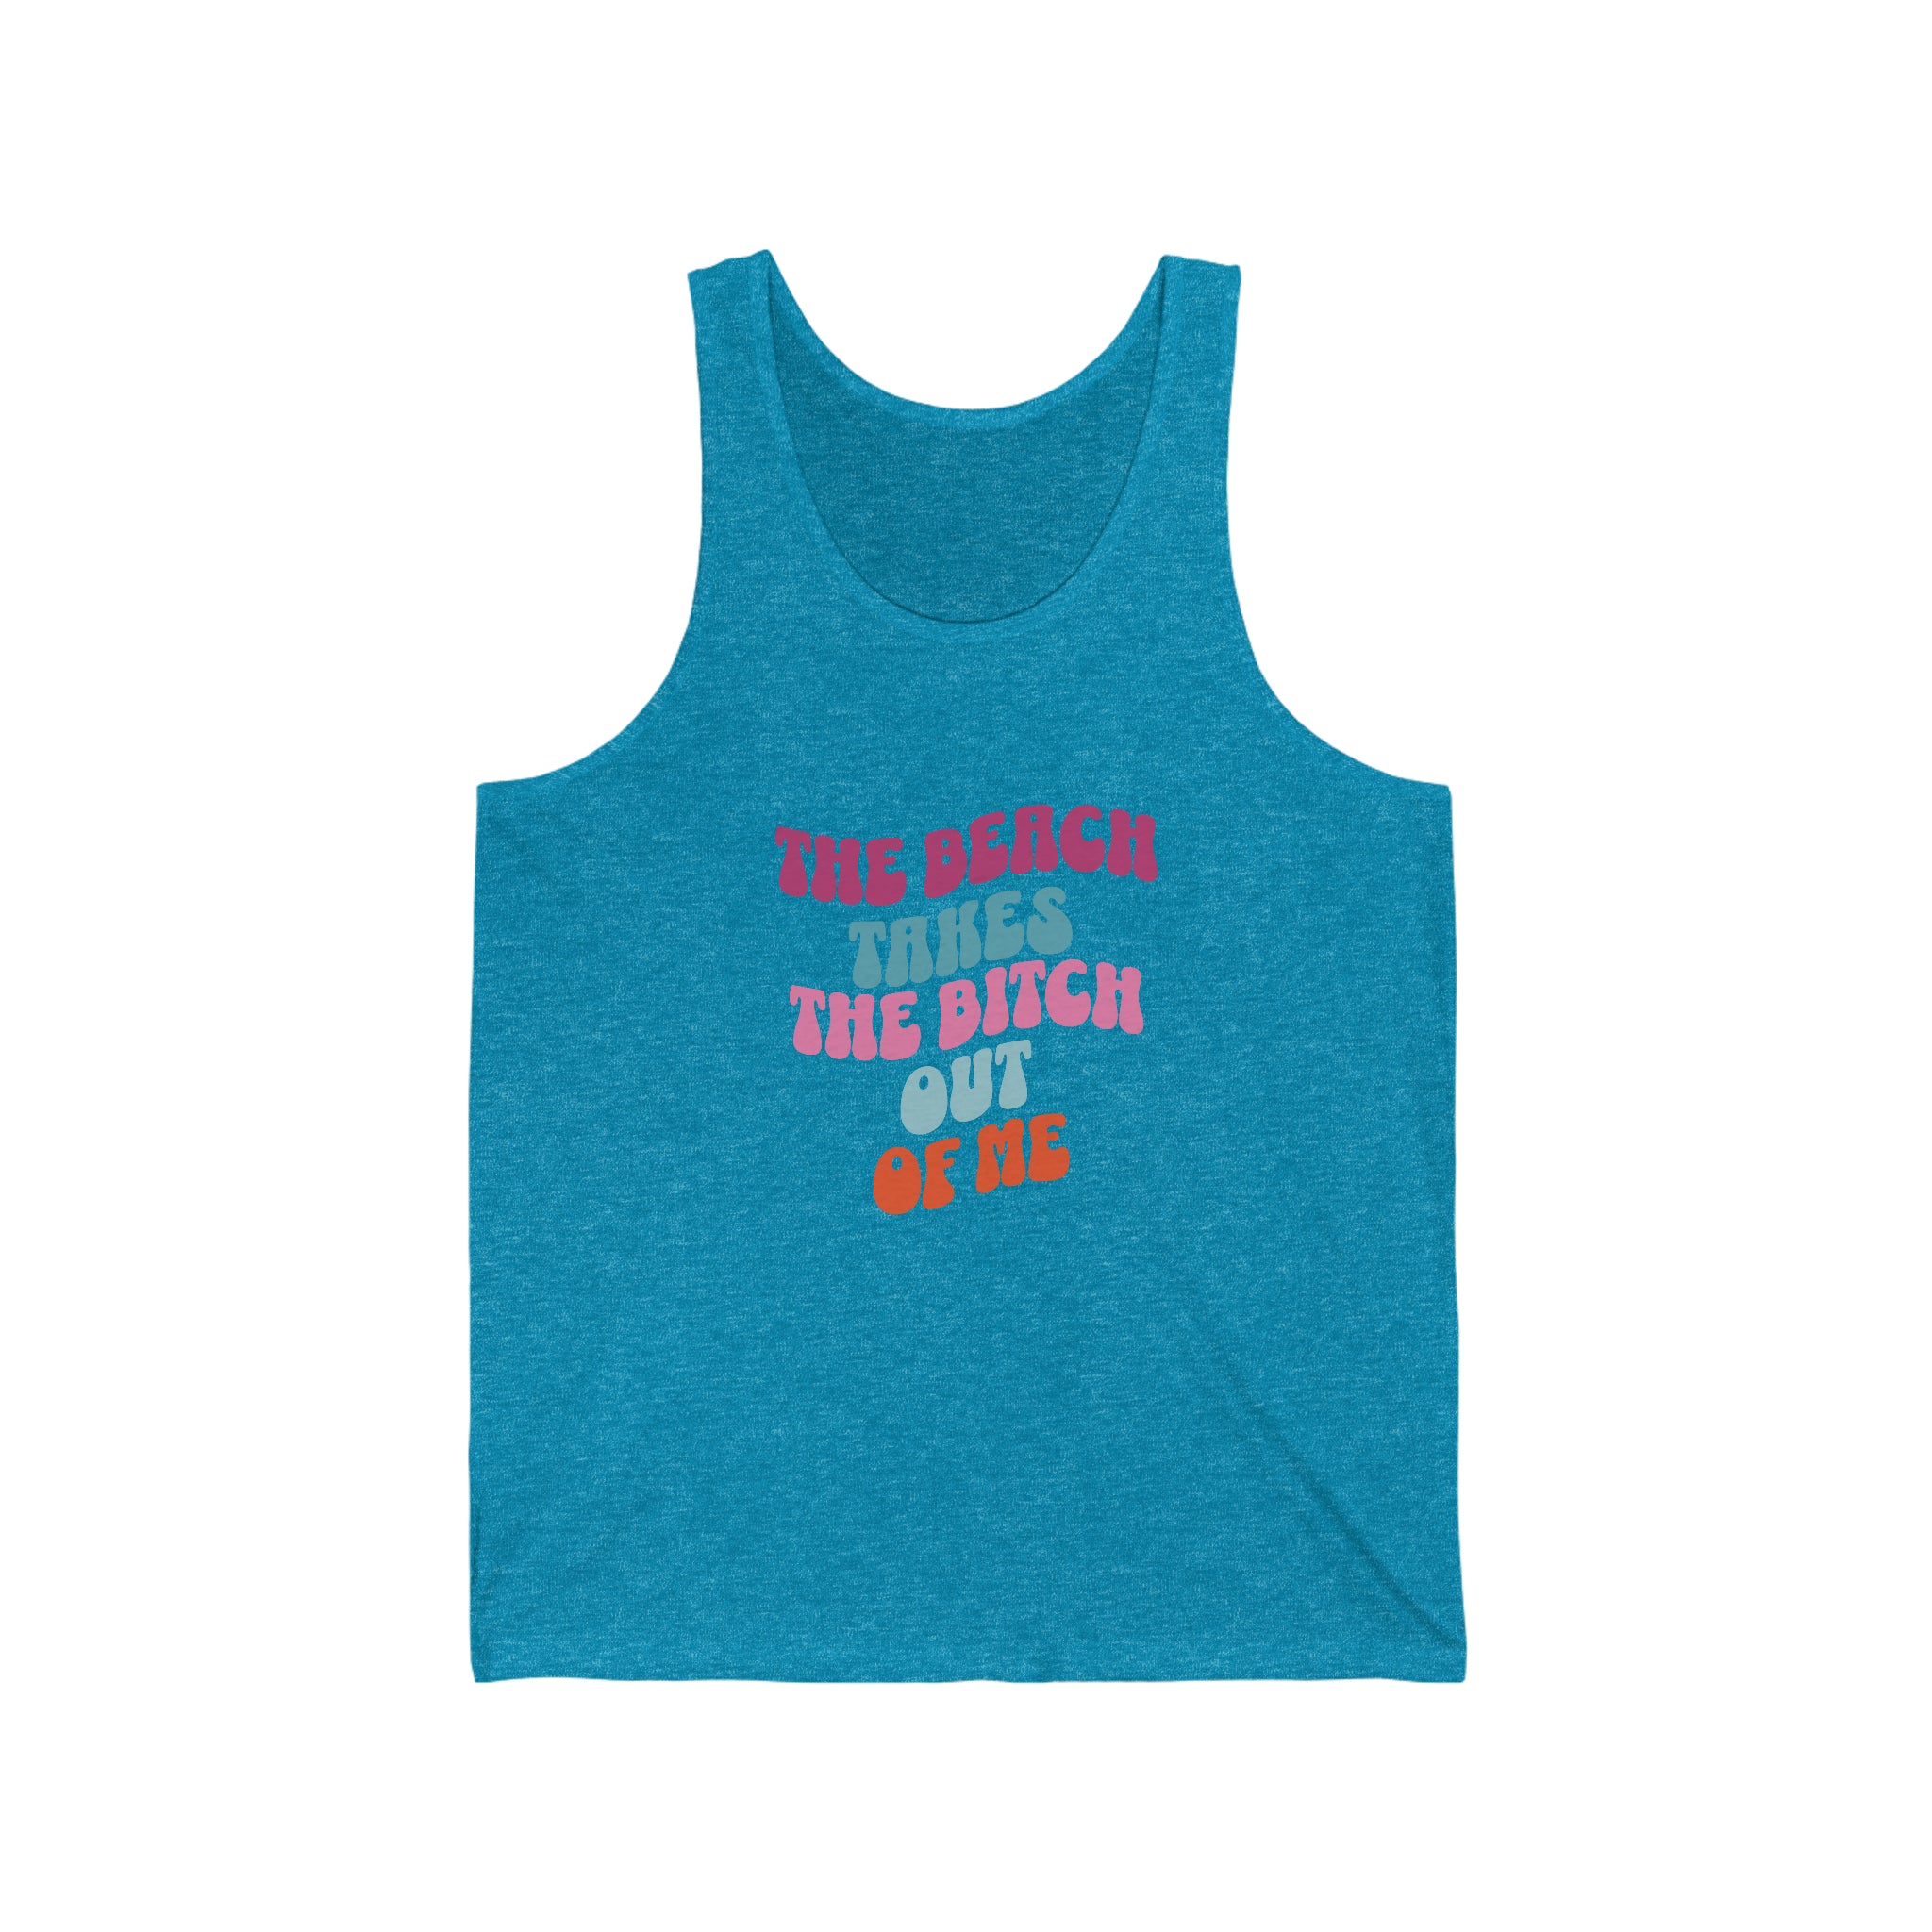 Summer Tank Top For Women Beach Takes The B-witch Out Of Me